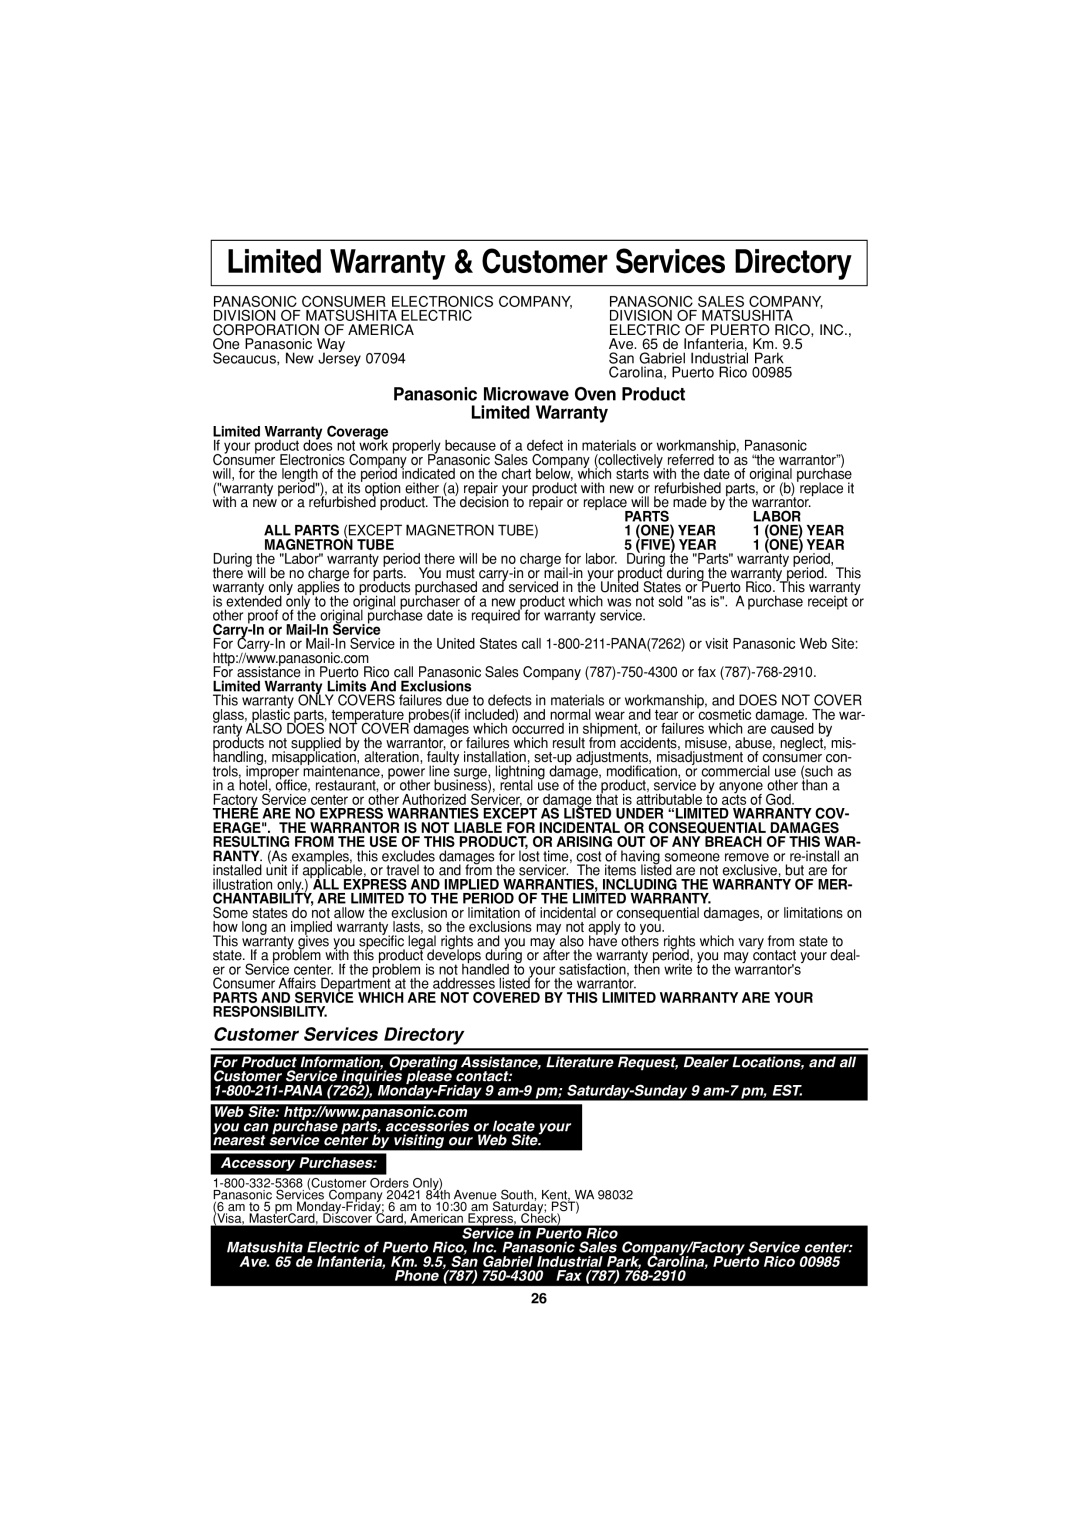 Panasonic NN-T793, NN-T993 Limited Warranty & Customer Services Directory, Accessory Purchases, Service in Puerto Rico 